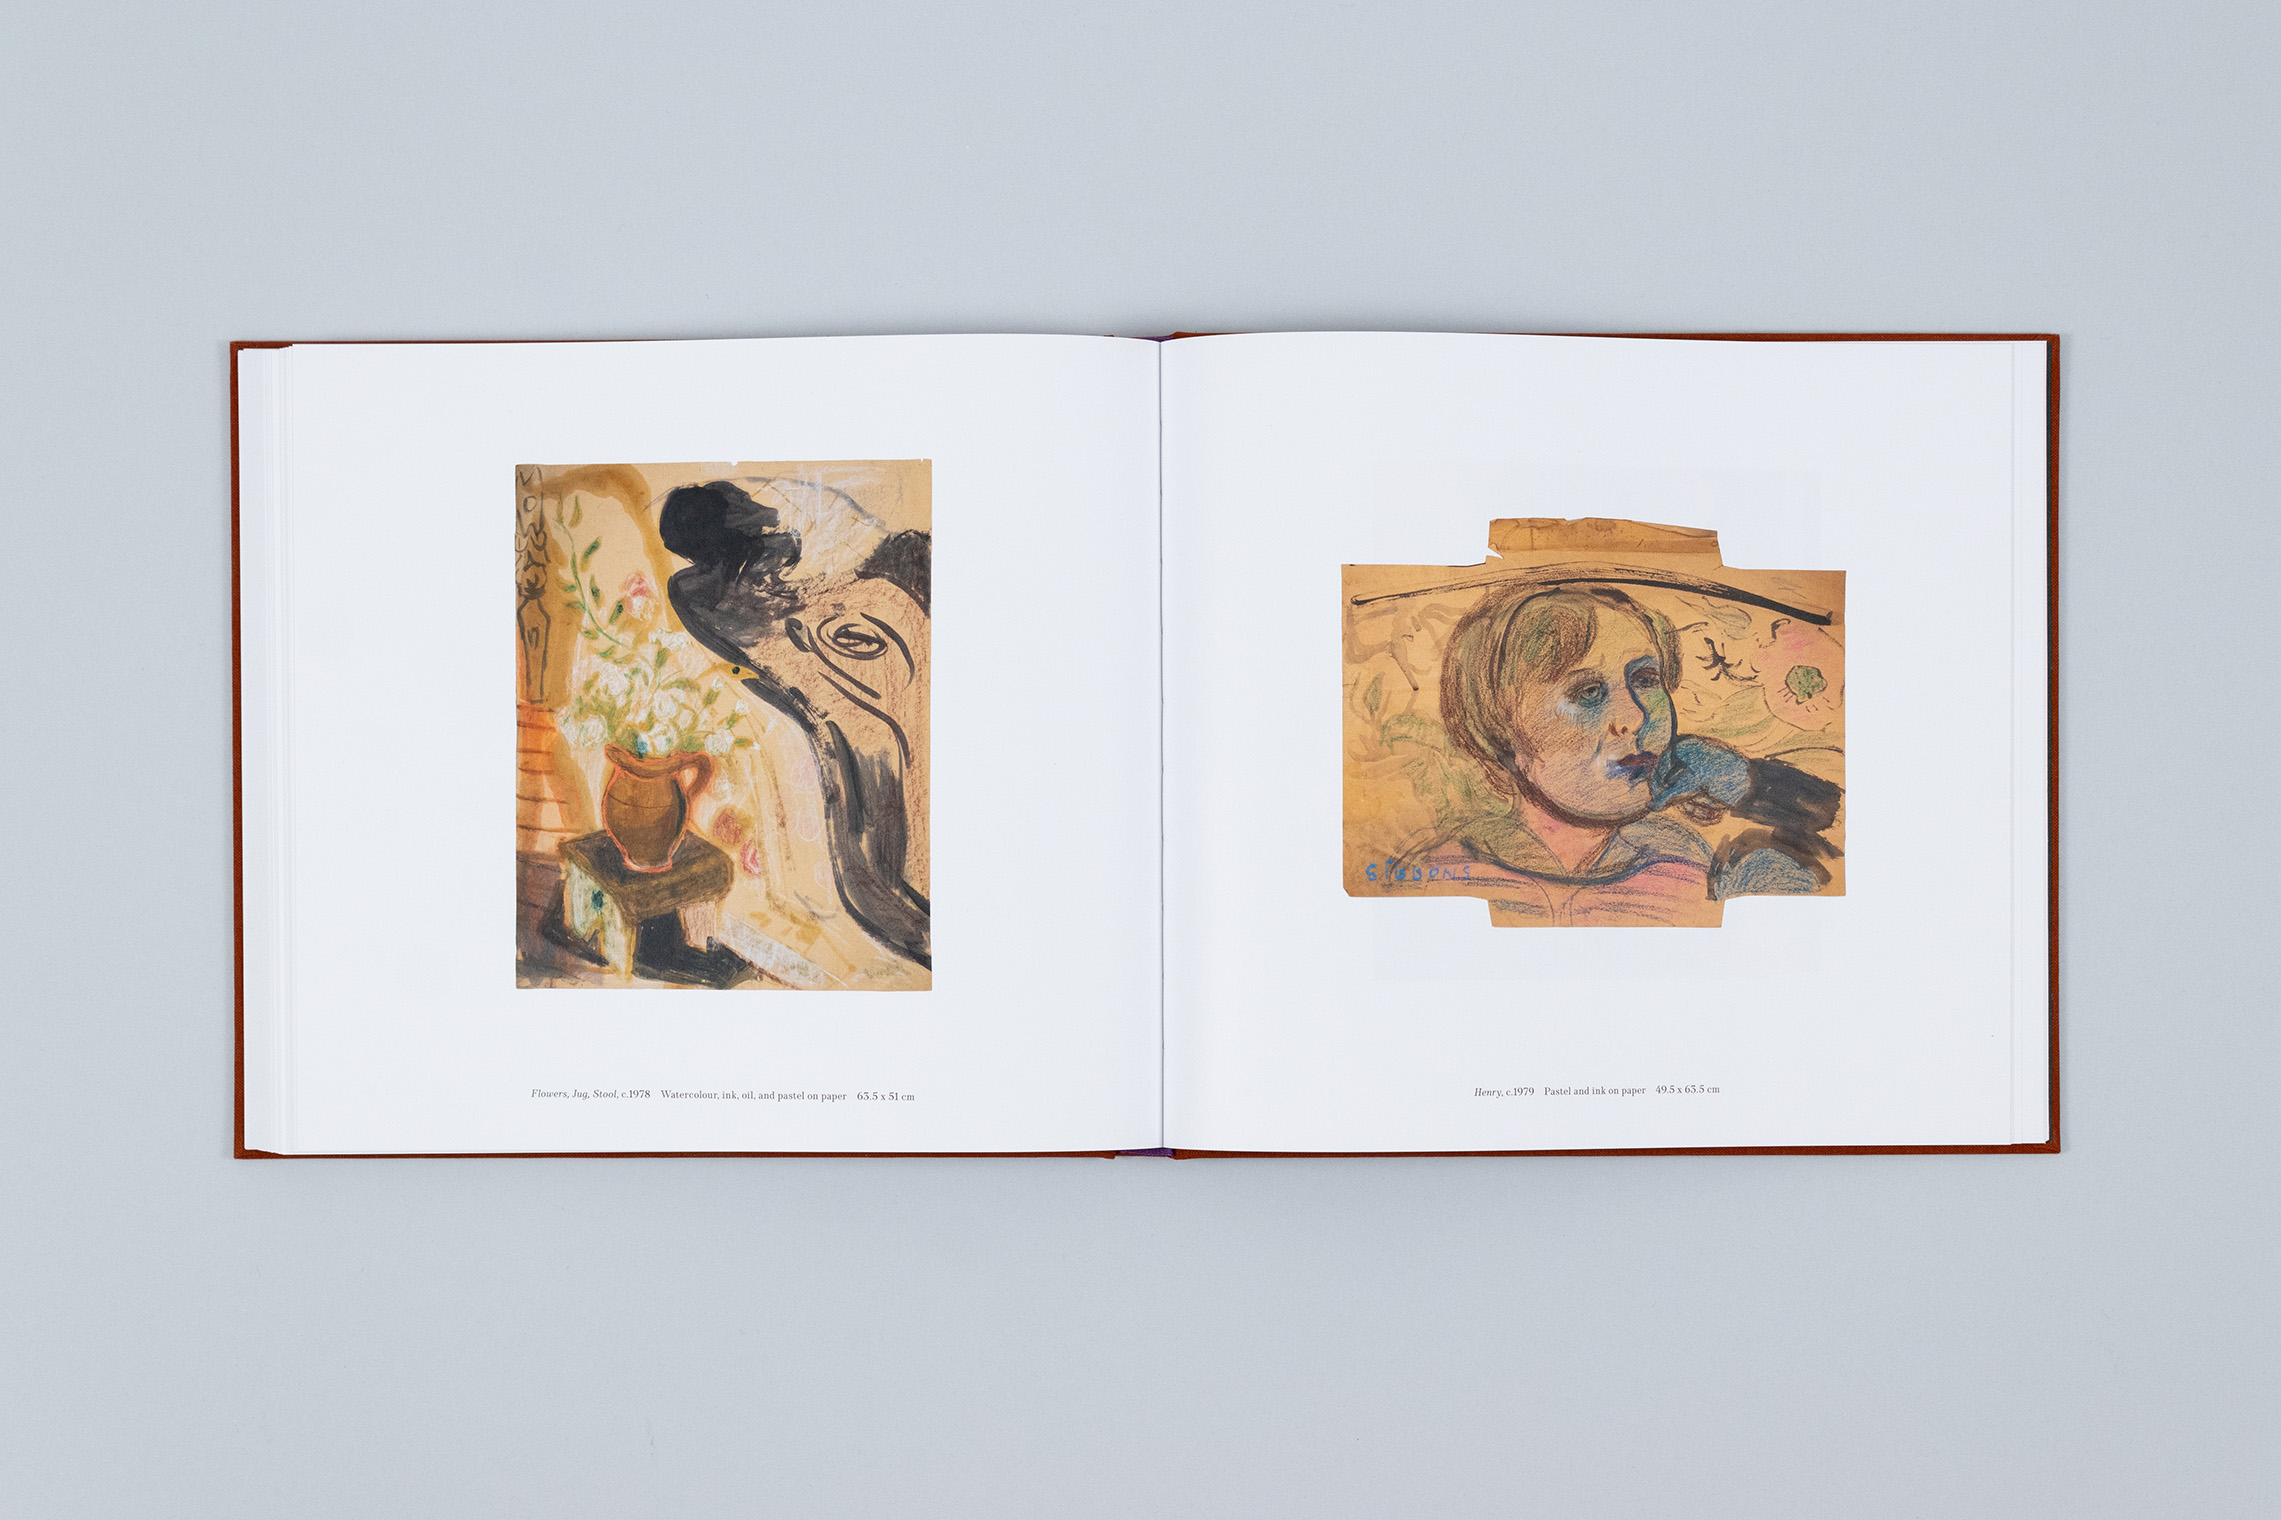 Carole Gibbons monograph spread with two works on paper over the pages, a portrait of her young son Henry on the right